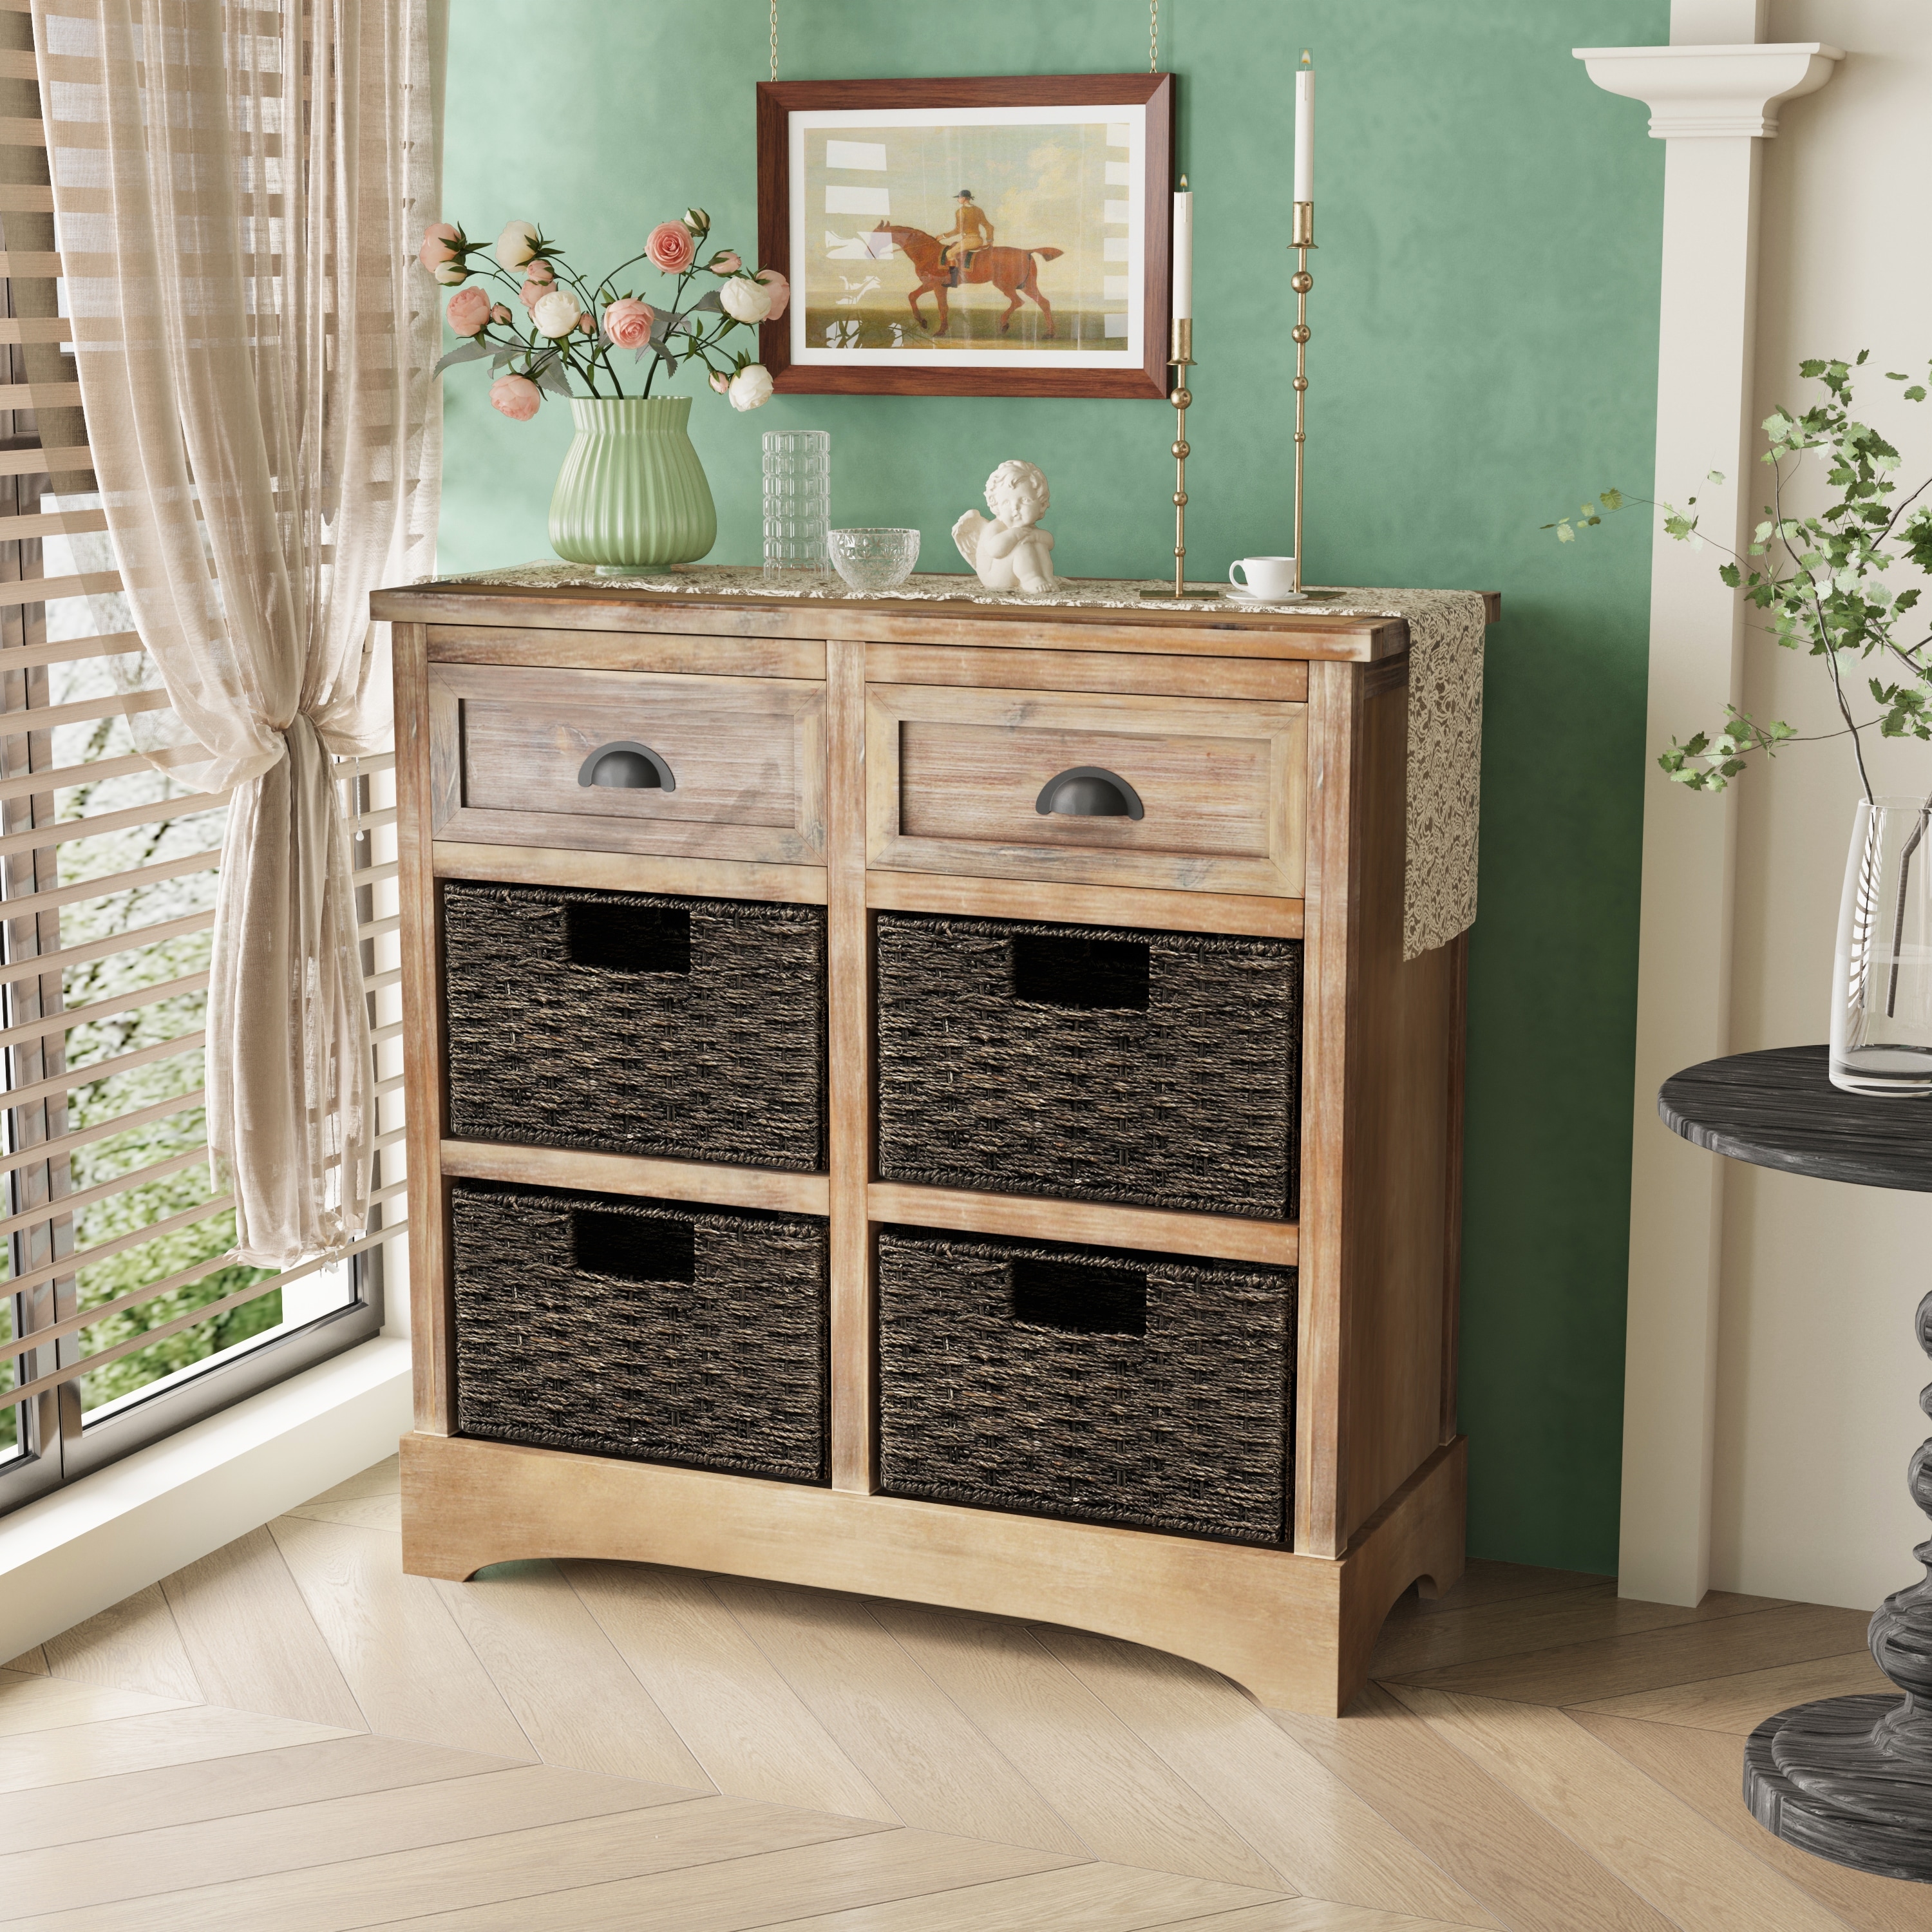 https://ak1.ostkcdn.com/images/products/is/images/direct/dda1a98d1fea8aca5f930e244da2a51f83545ad7/Rustic-Storage-Cabinet-with-Two-Drawers-and-Four-Classic-Rattan-Basket-for-Dining-Room-Living-Room.jpg